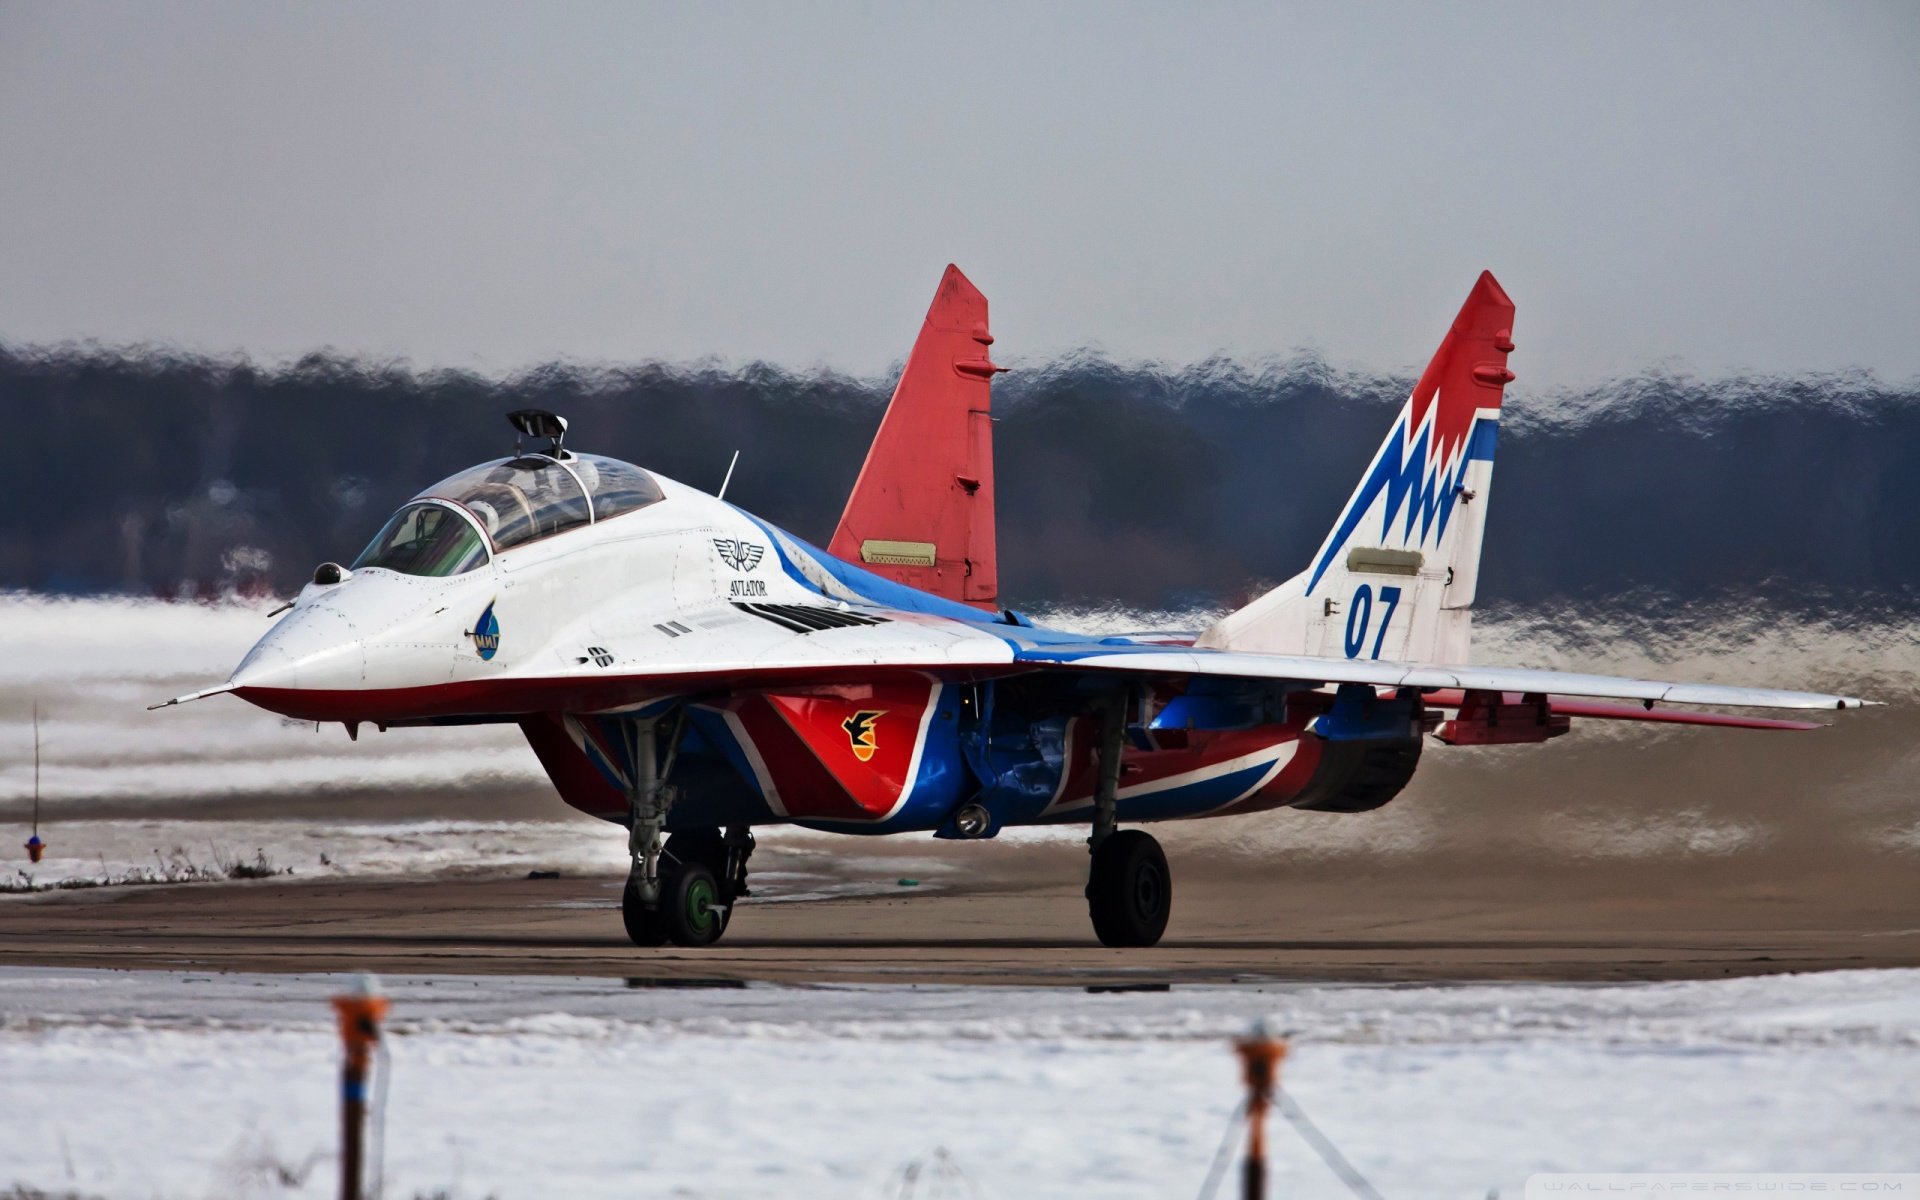 mig 29, Fighter, Jet, Military, Russian, Airplane, Plane, Mig,  52 Wallpaper